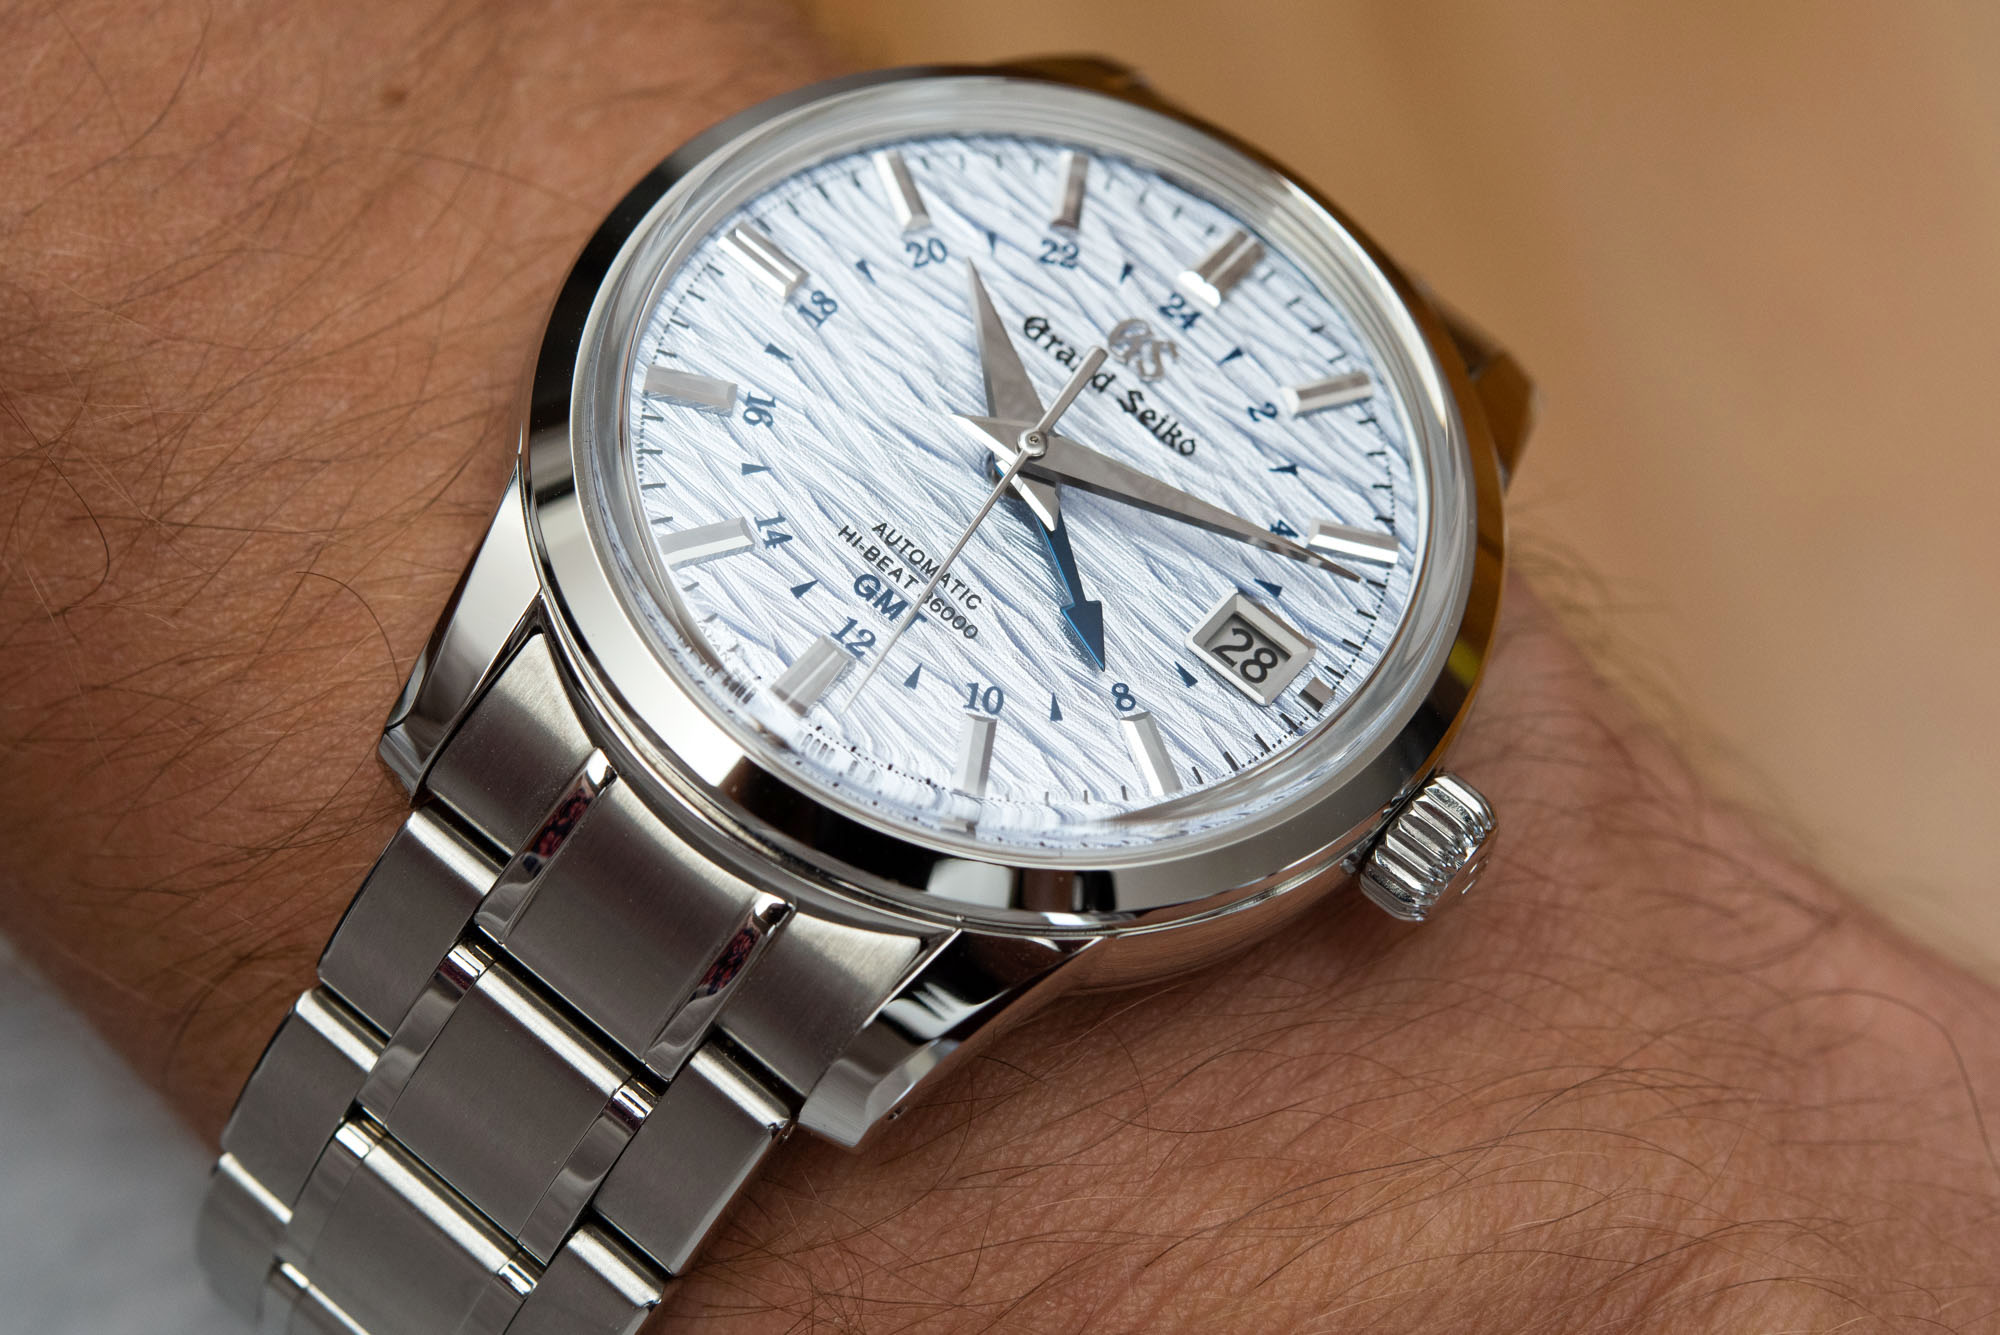 Hands-On With The Spectacular Grand Seiko SBGJ249 Shosho Hi-Beat Watch